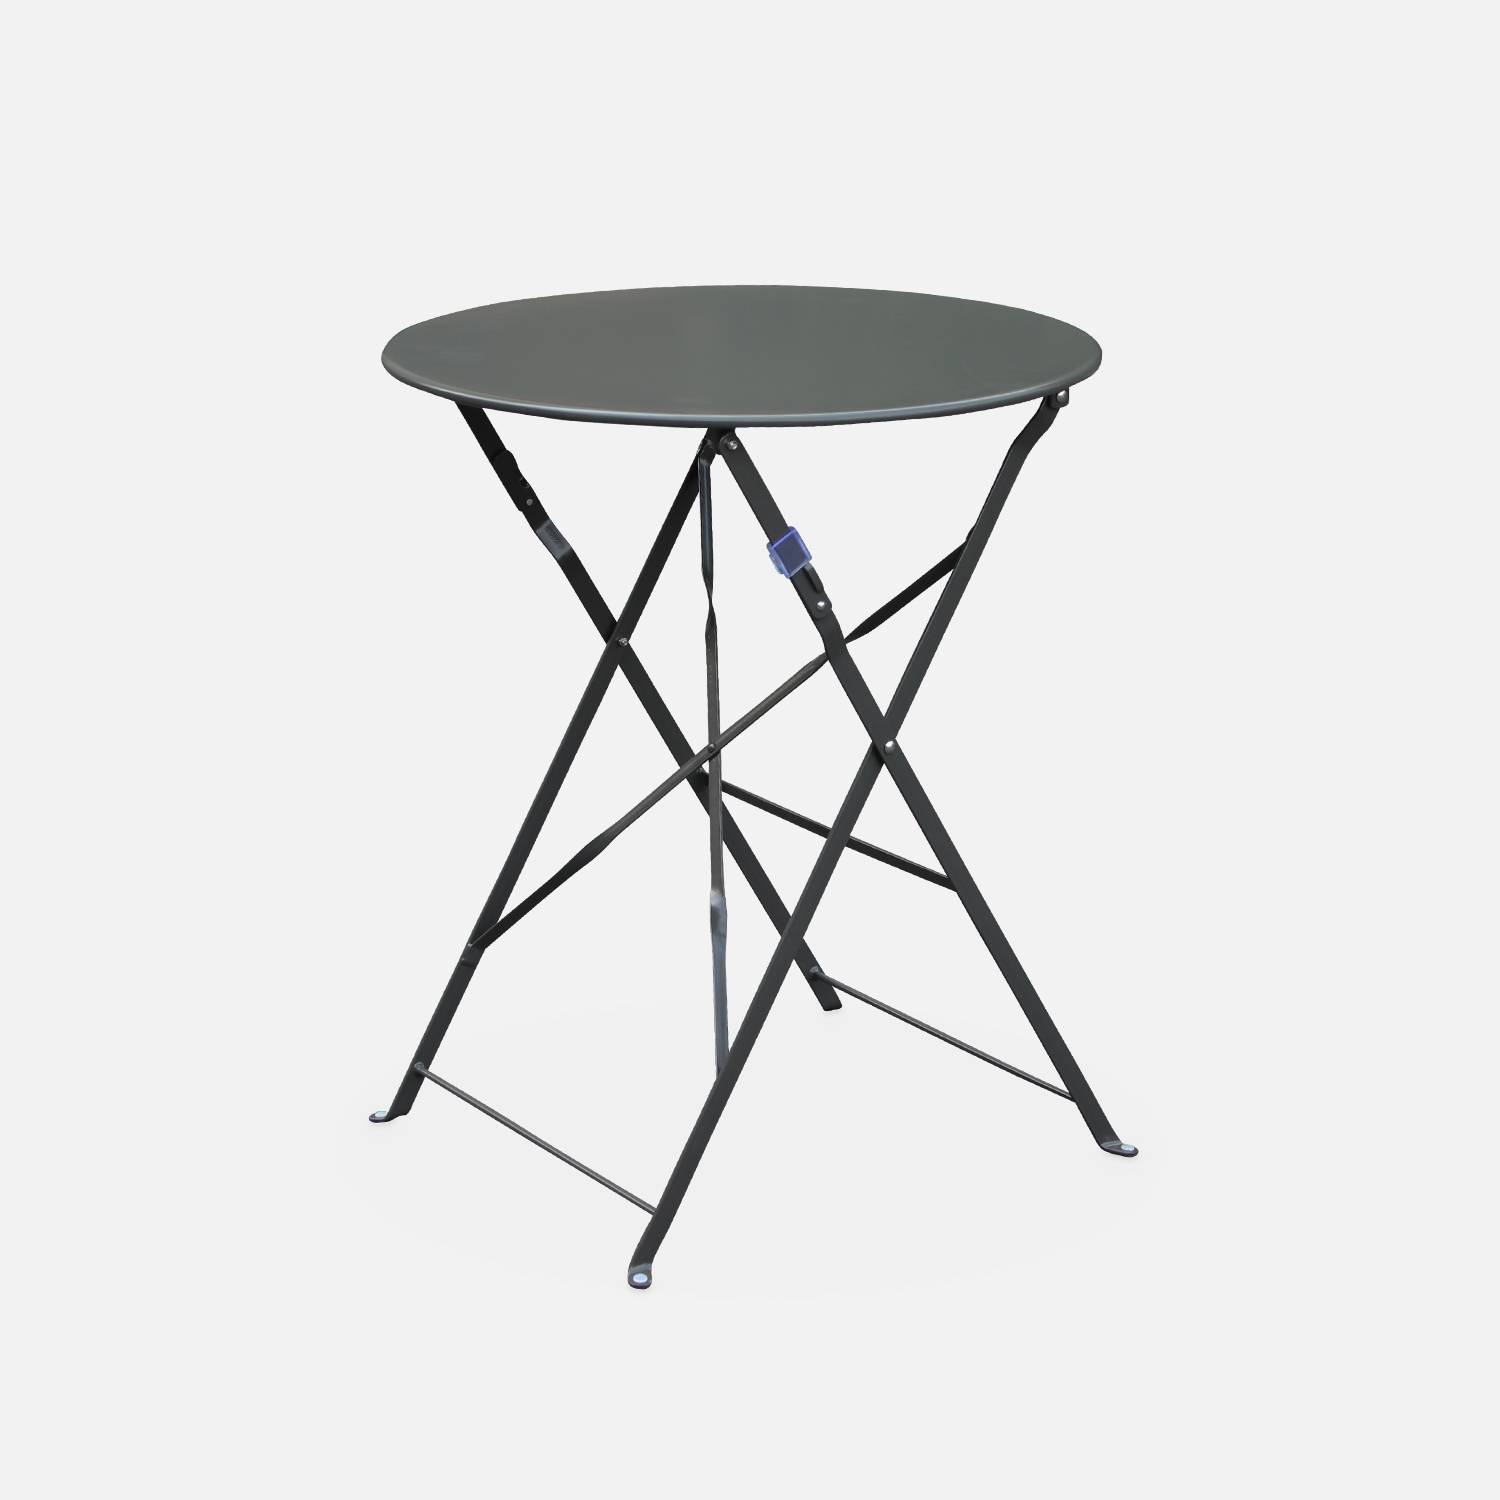 Foldable bistro garden table - Round Emilia anthracite- Round table Ø60cm, thermo-lacquered steel | sweeek